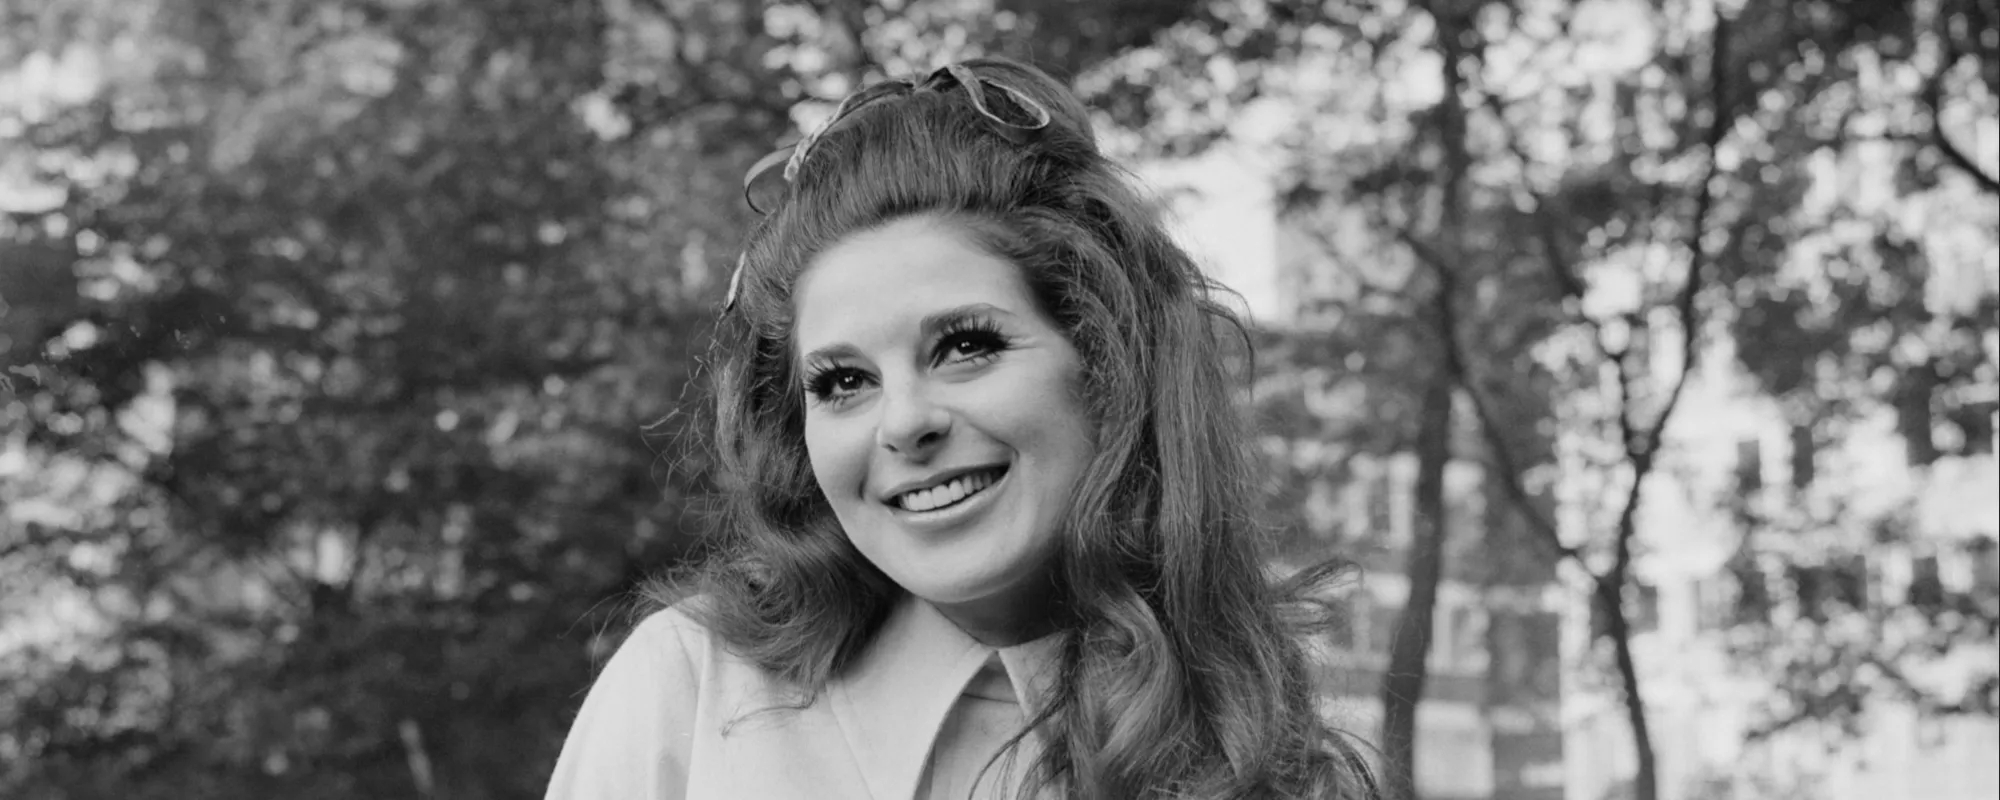 The Meaning Behind the Song Lyrics: “Fancy” by Bobbie Gentry